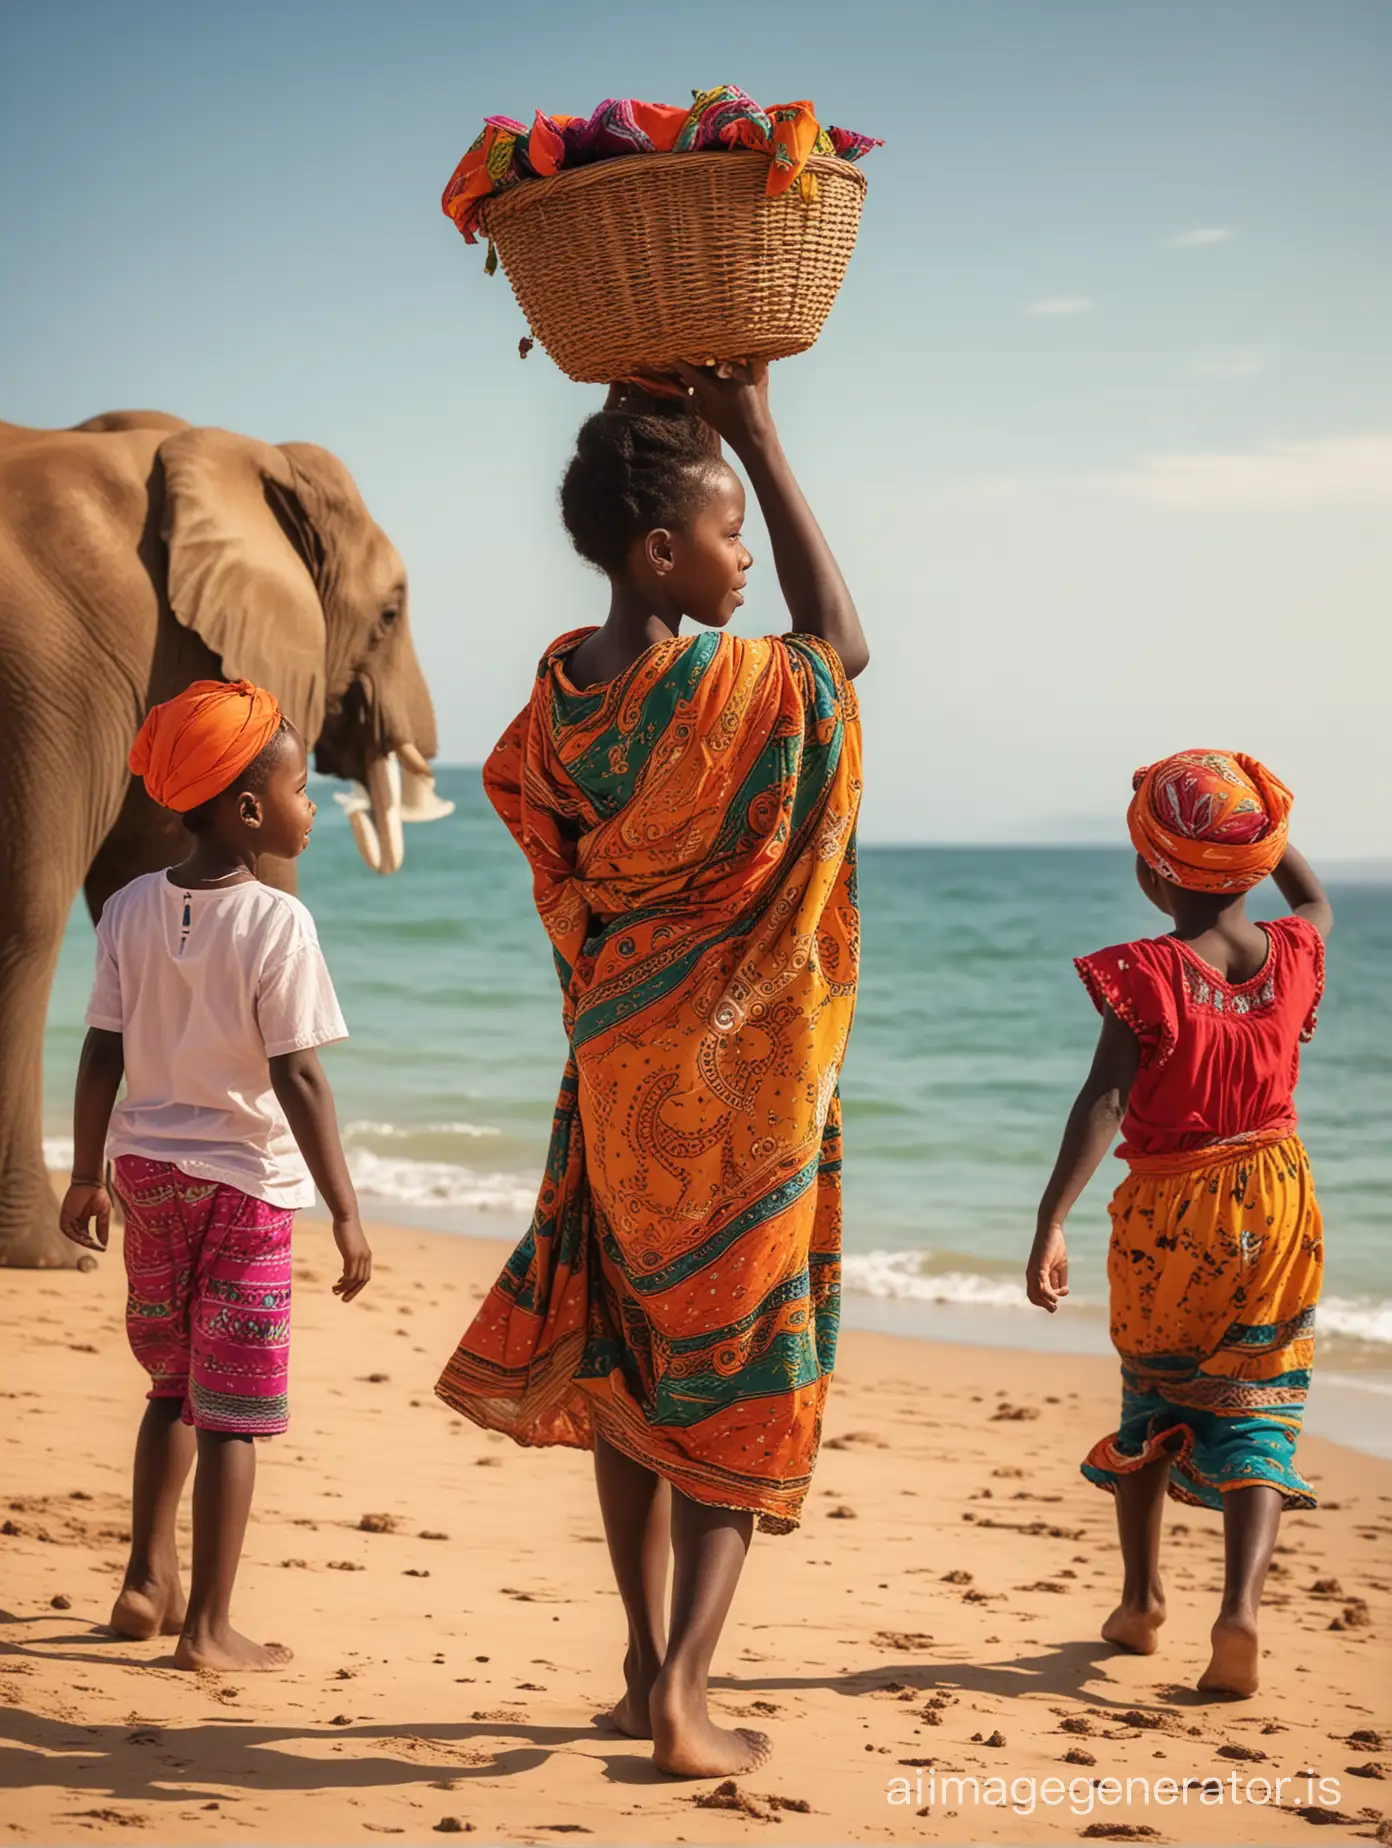 Dark skin African people, wearing typical colorful clothes, one woman with a basket over her head, background little children playing near the sea, warm light, one big elephant